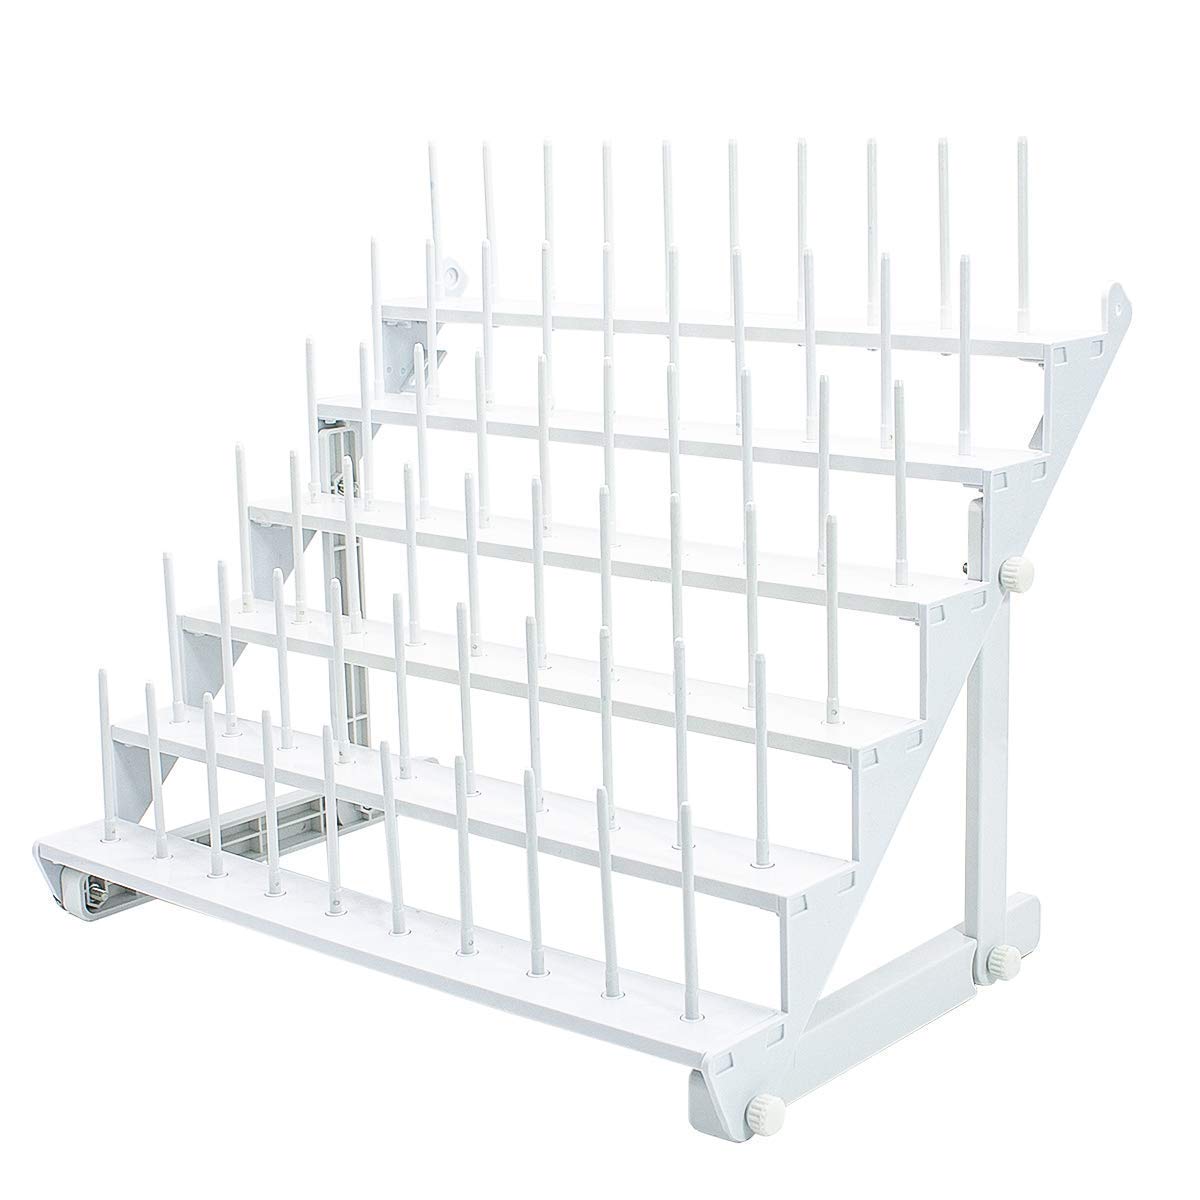 Sew Tech Thread Rack for 60 Spools or 30 Cones, Wall Mounted Large Thread Holder with Long Pegs, Bright White Plastic Thread Sta